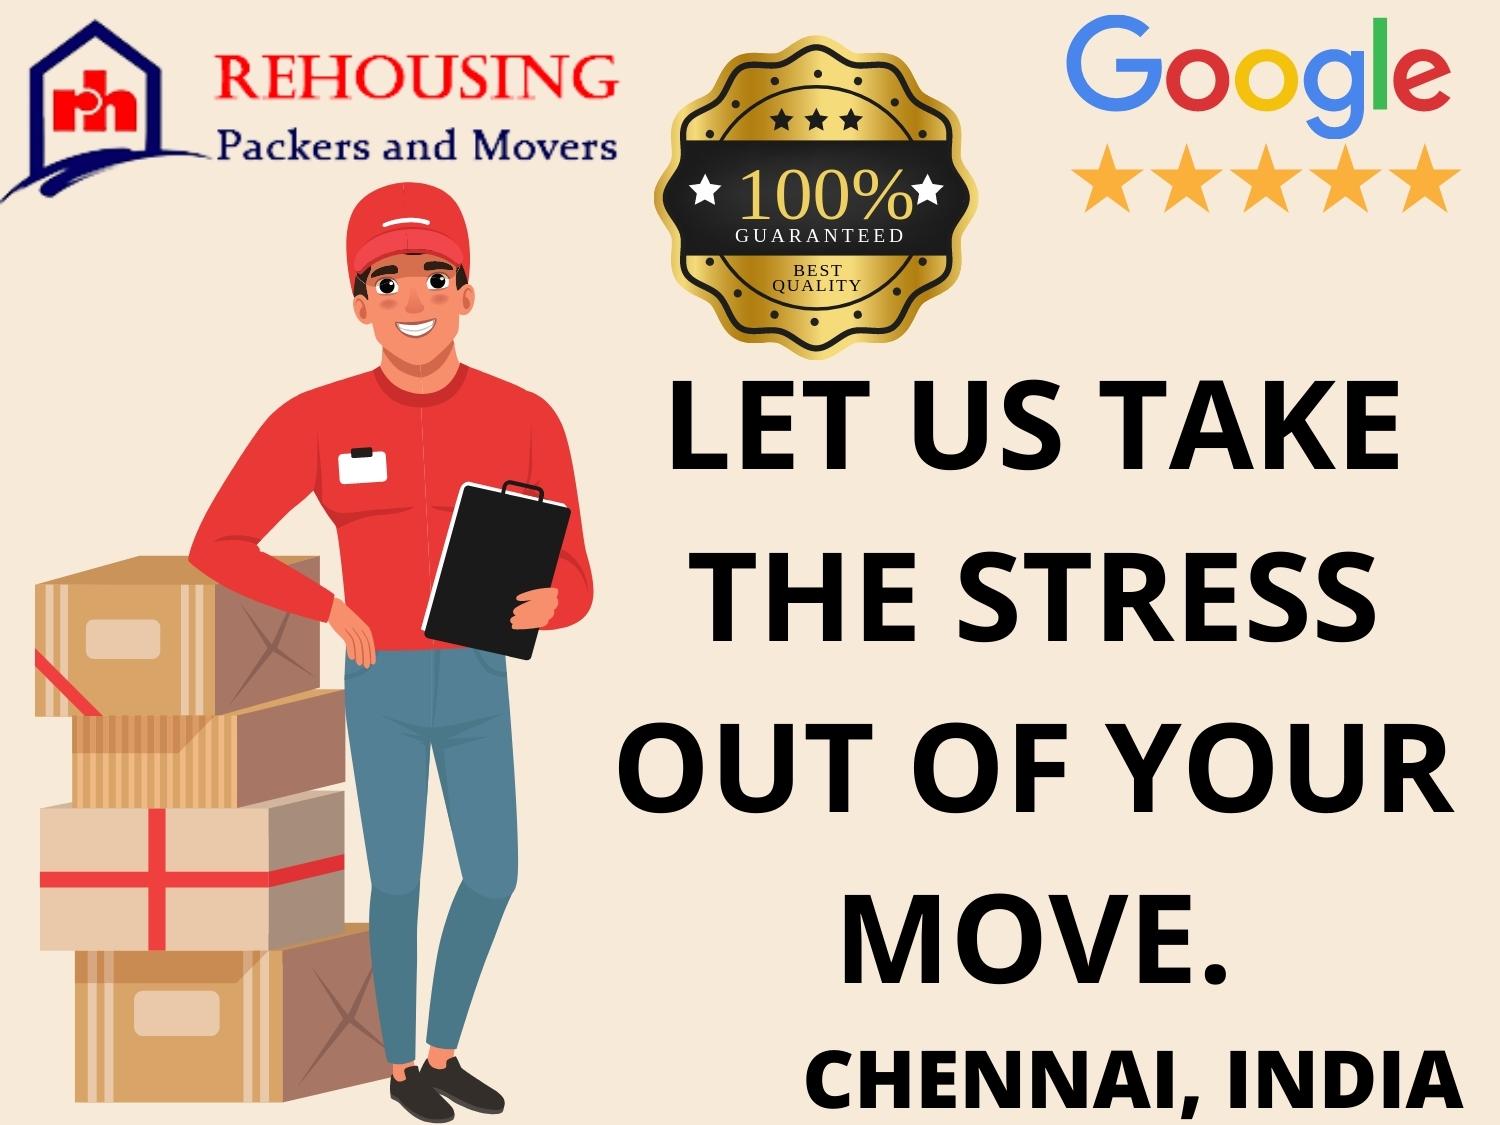 truck transport service from Chennai to Bangalore work